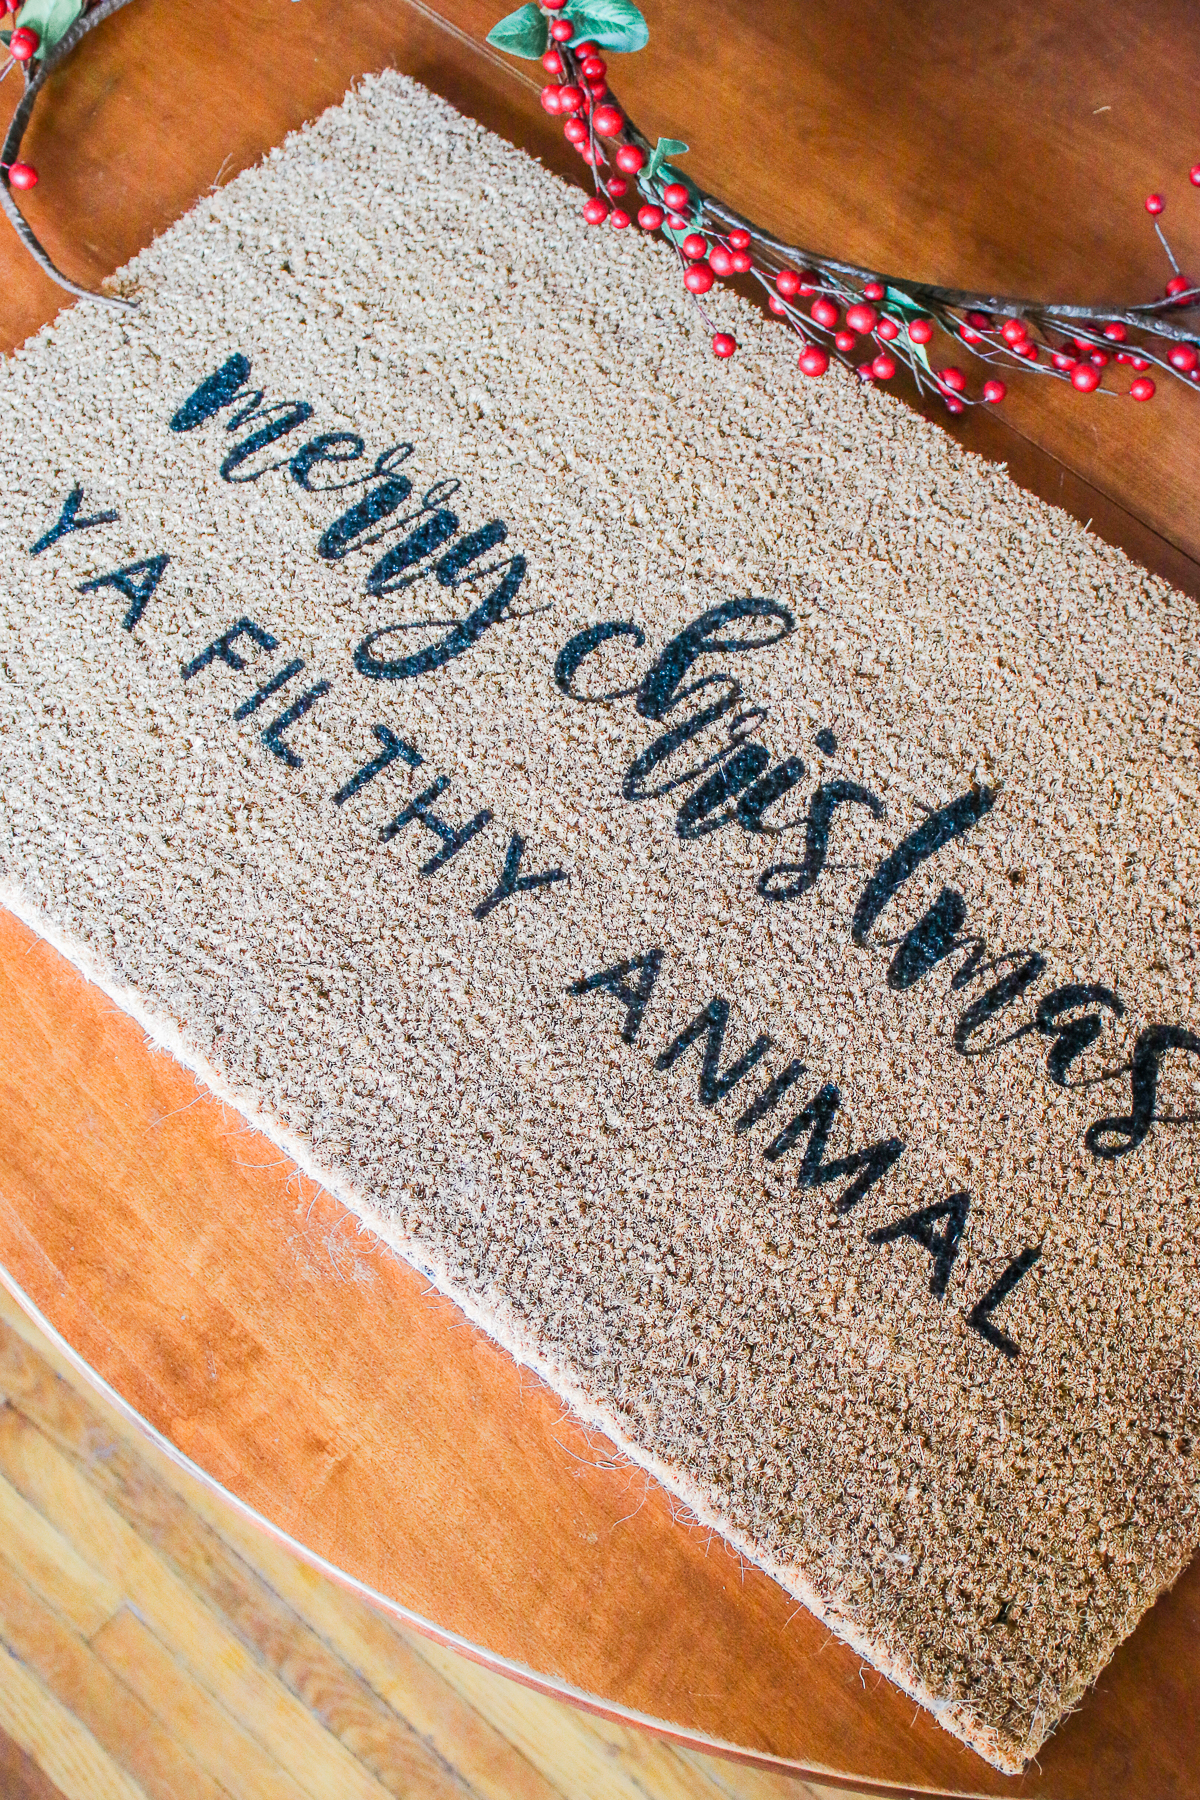 "Merry Christmas Ya Filthy Animal" DIY Painted Doormat by southern lifestyle blogger Stephanie Ziajka from Diary of a Debutante, DIY doormat stencil with Cricut Explore Air 2, Cricut doormat tutorial, DIY outdoor mat, paint your own doormat tutorial, paint doormat